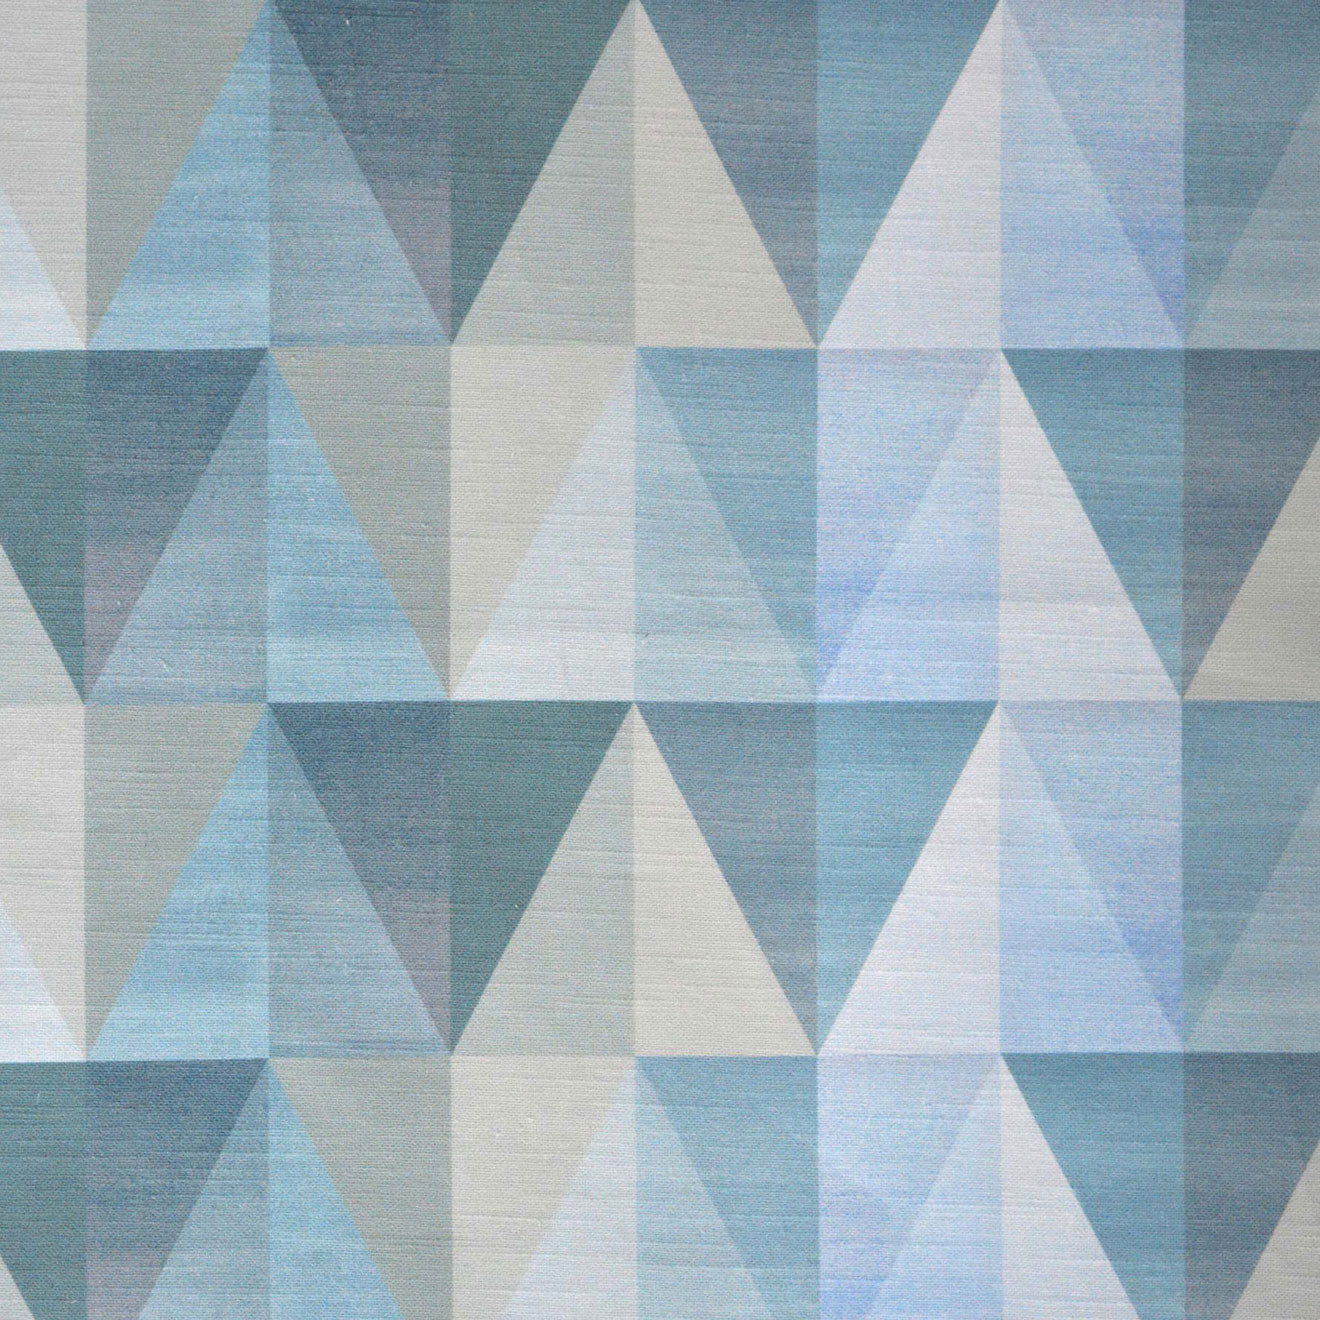 Detail of fabric in a linear triangle print in shades of tan, navy and blue.